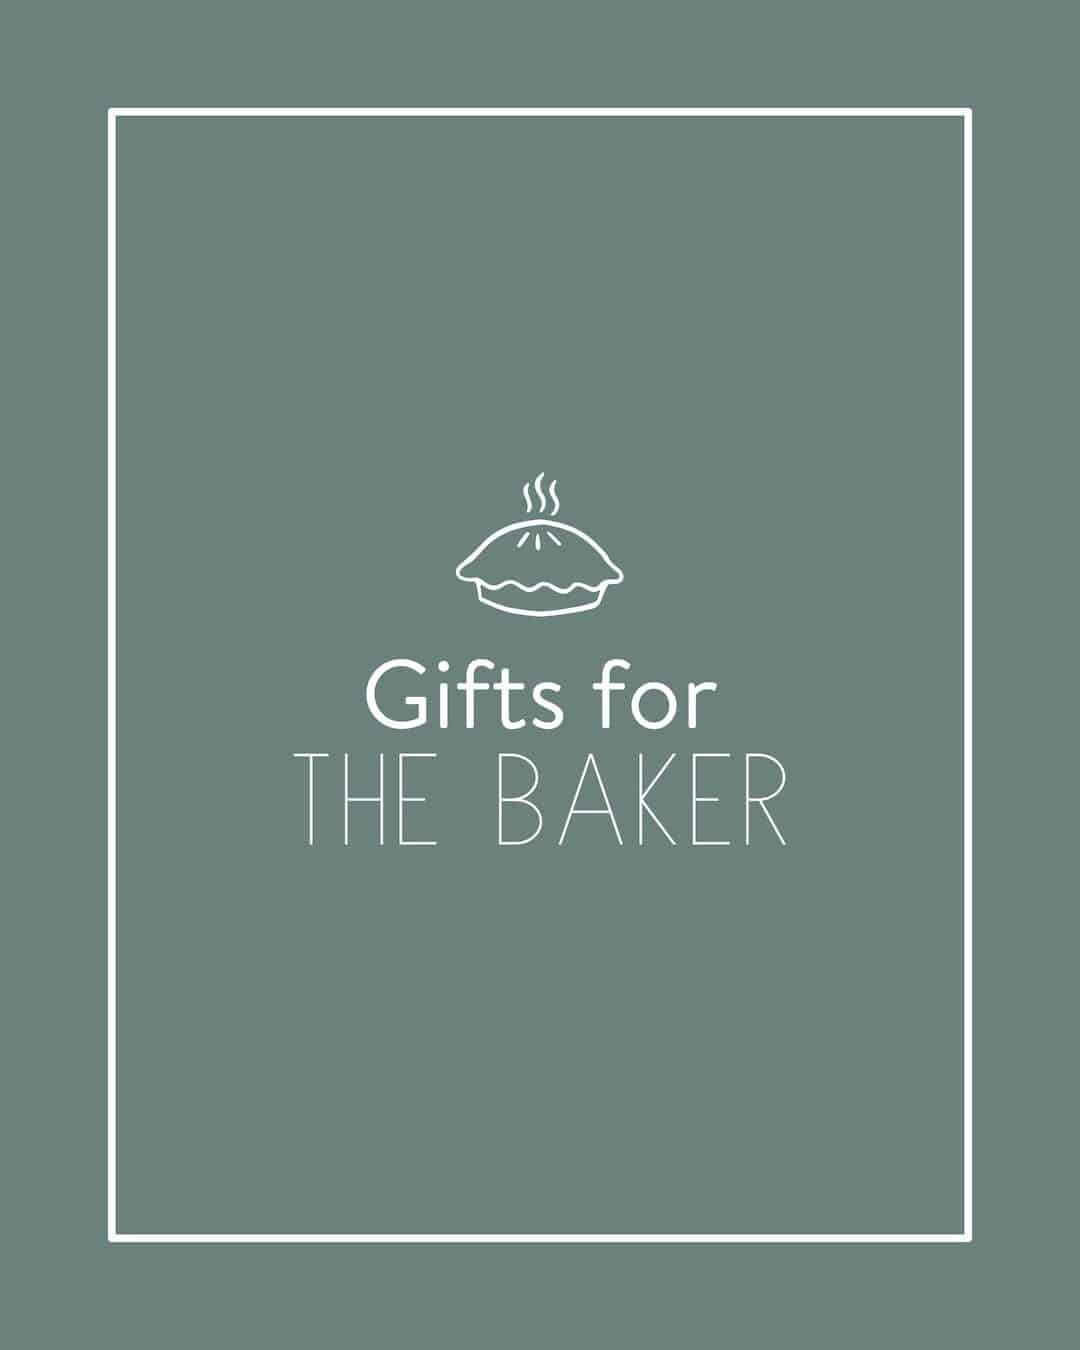 Gifts for The Baker